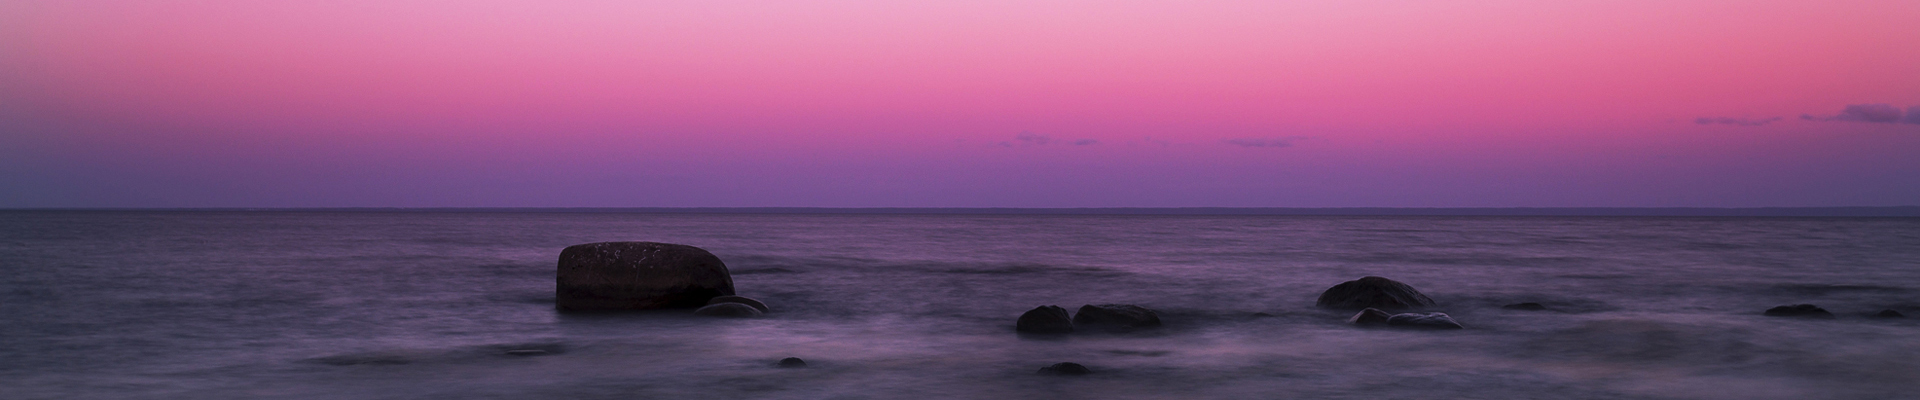 Pink sunset over the ocean